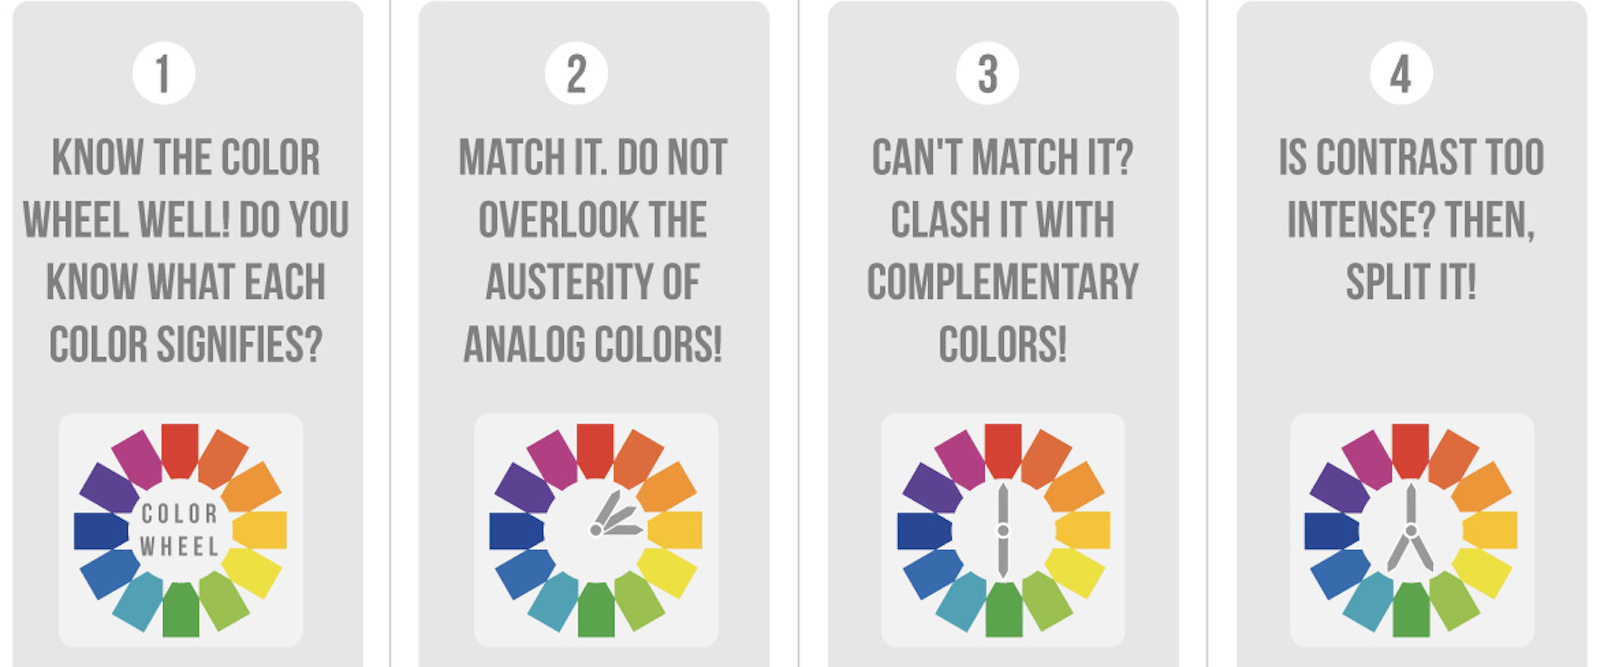 Make Your Projects More Enticing With Color Theory